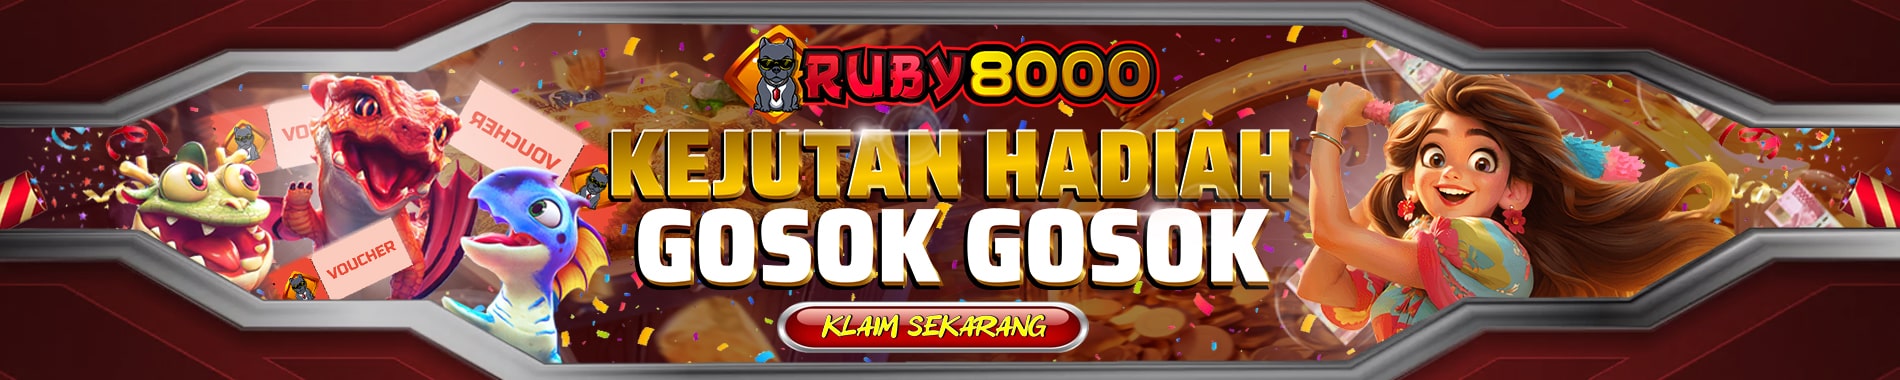 event ruby8000